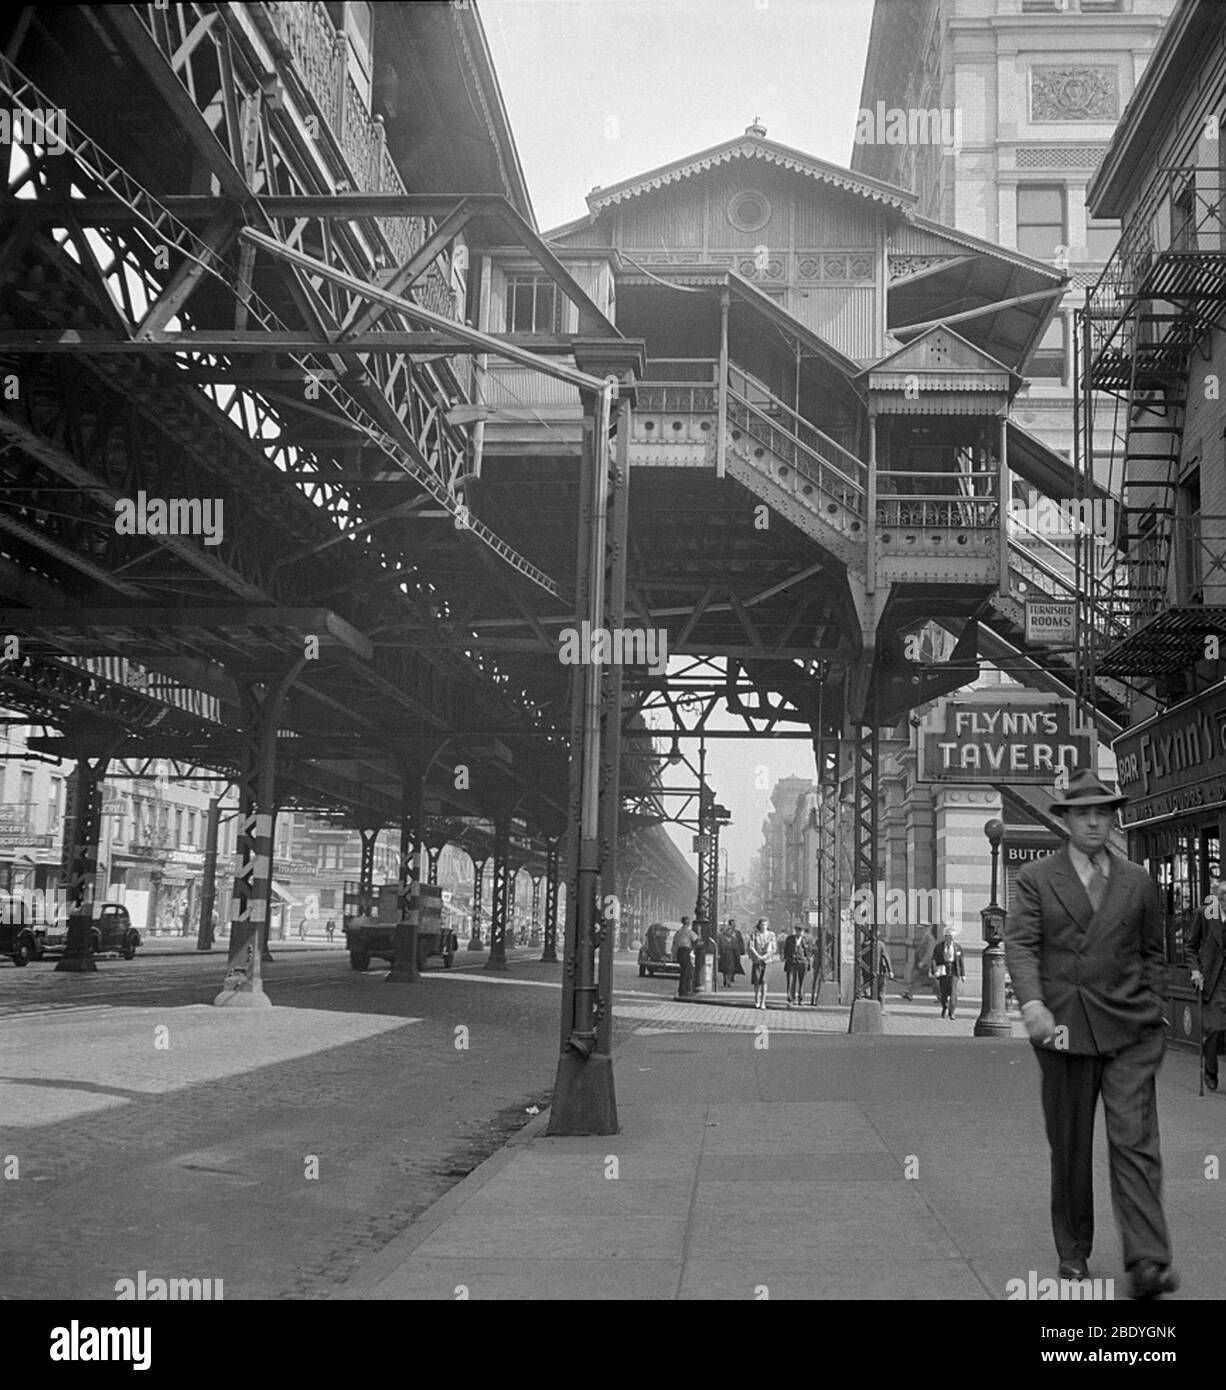 Third Avenue Elevated Railway, New York, 1942 Banque D'Images